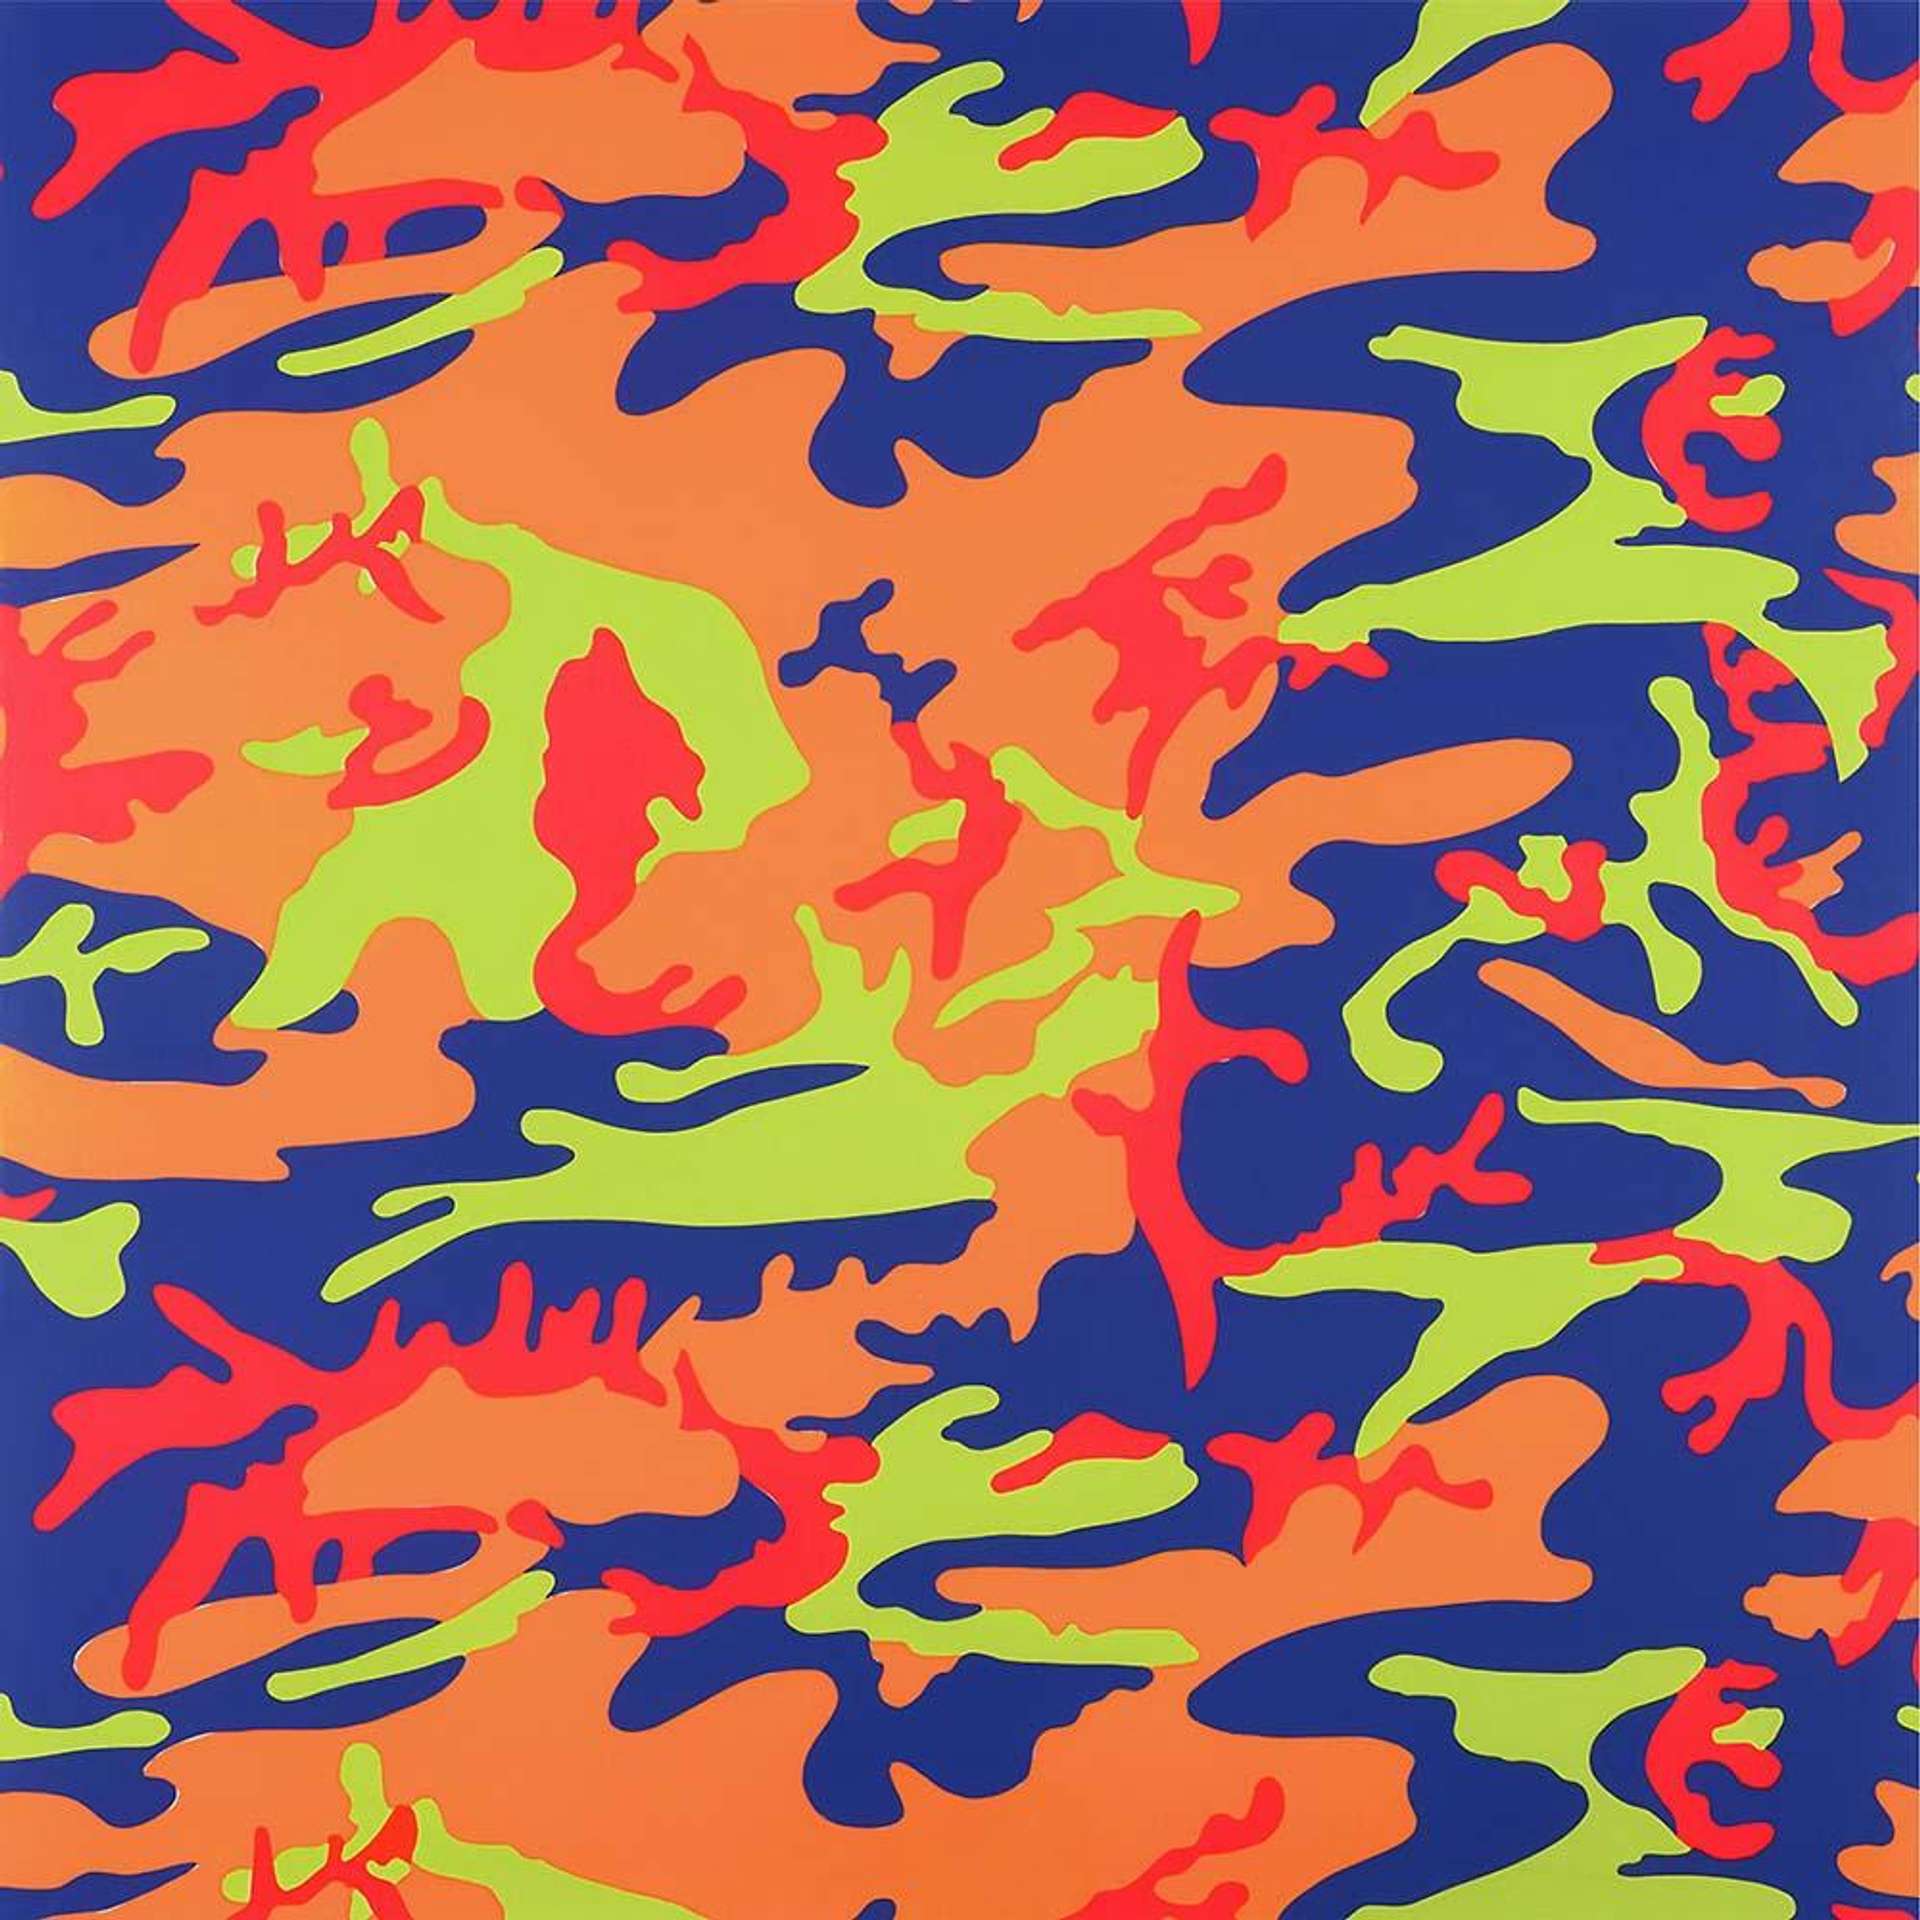 10 Facts About Andy Warhol's Camouflage